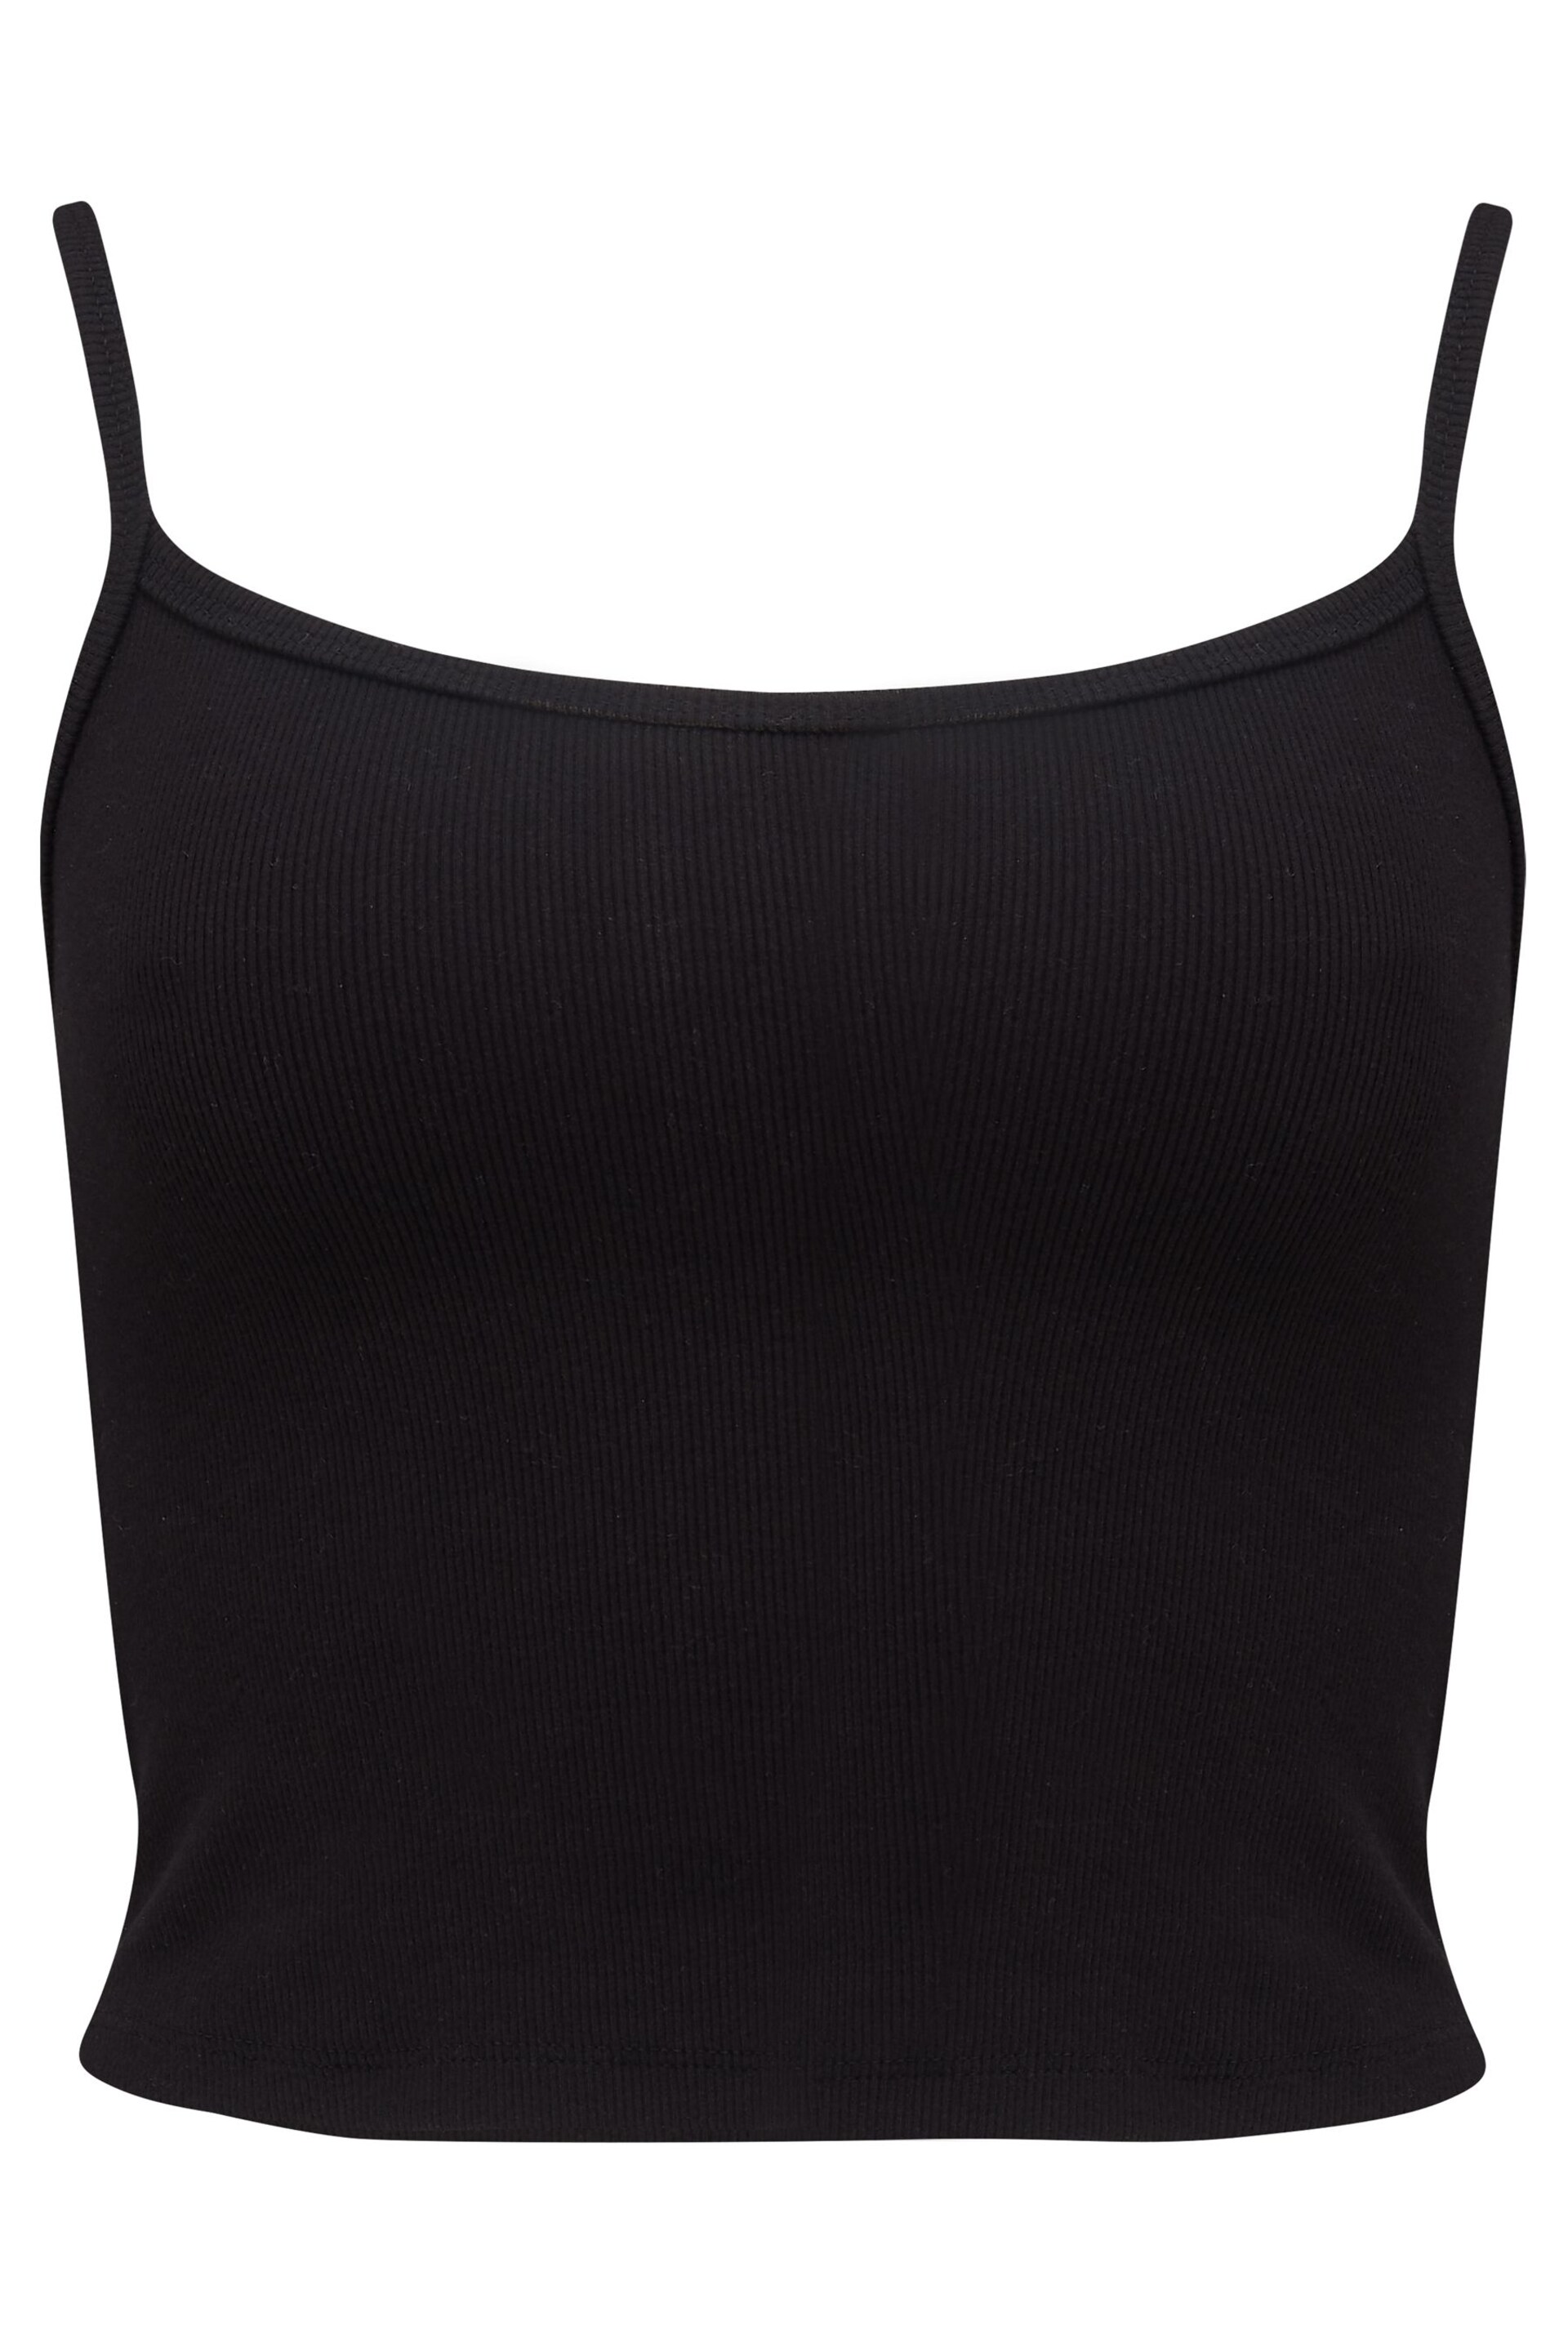 Pour Moi Black Off Duty Rib Jersey Support Cami - Image 4 of 5